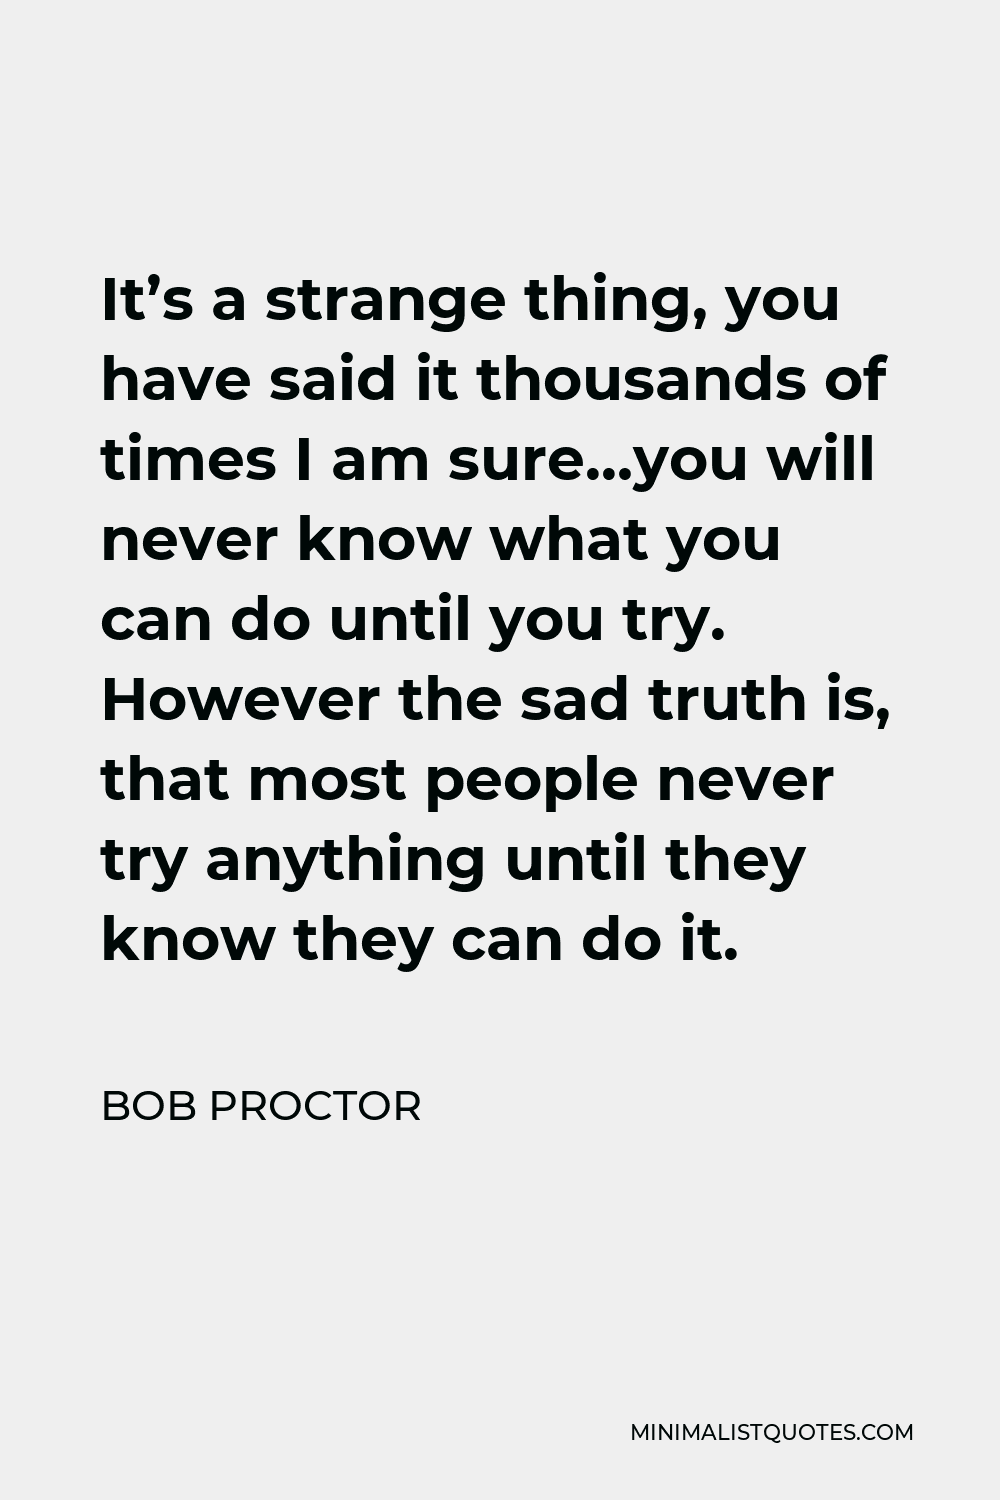 Bob Proctor Quote - It’s a strange thing, you have said it thousands of times I am sure…you will never know what you can do until you try. However the sad truth is, that most people never try anything until they know they can do it.